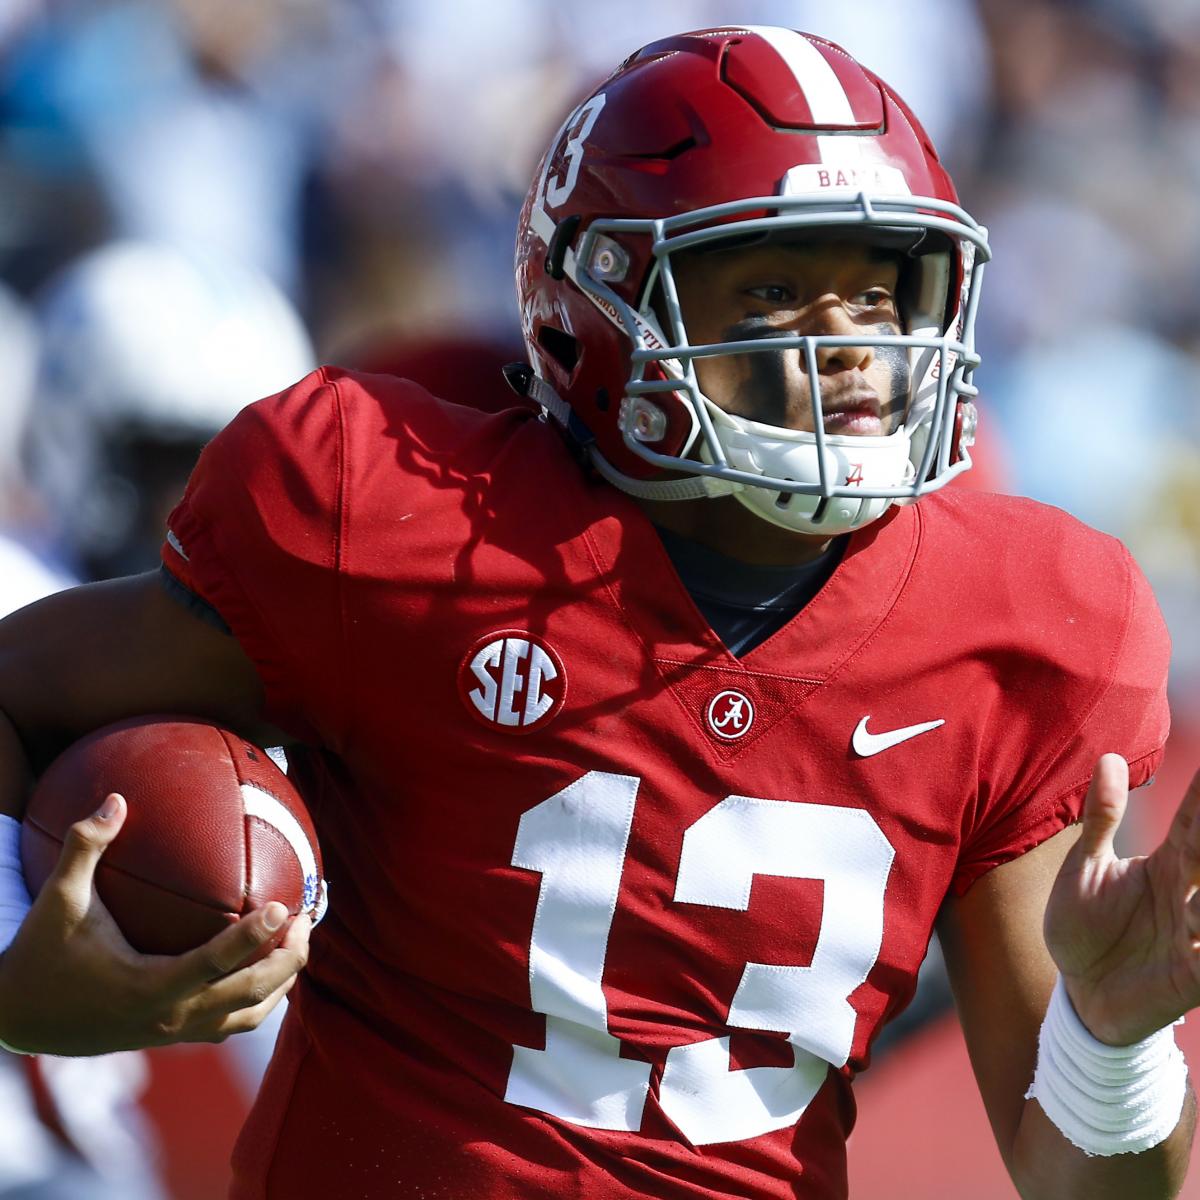 Cfb playoff odds 2020